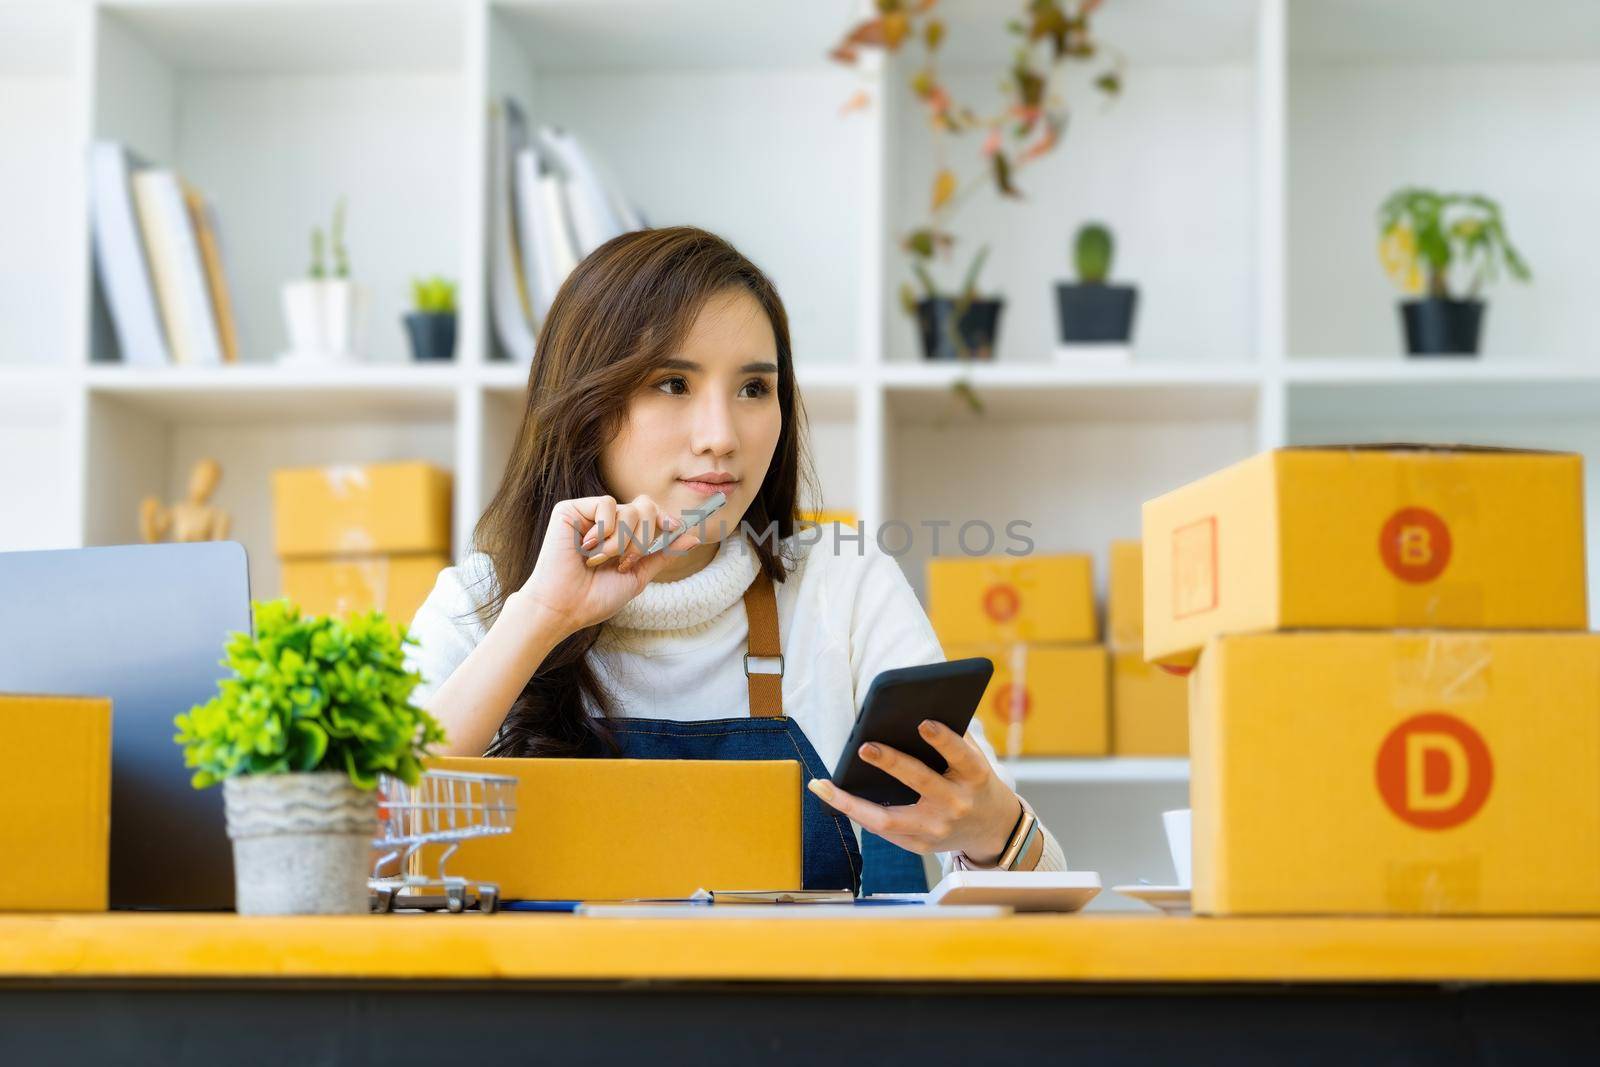 Work from home. happy women selling products online Start a small business owner by using smartphone and laptop computer to calculate prices and prepare for postage. by Manastrong